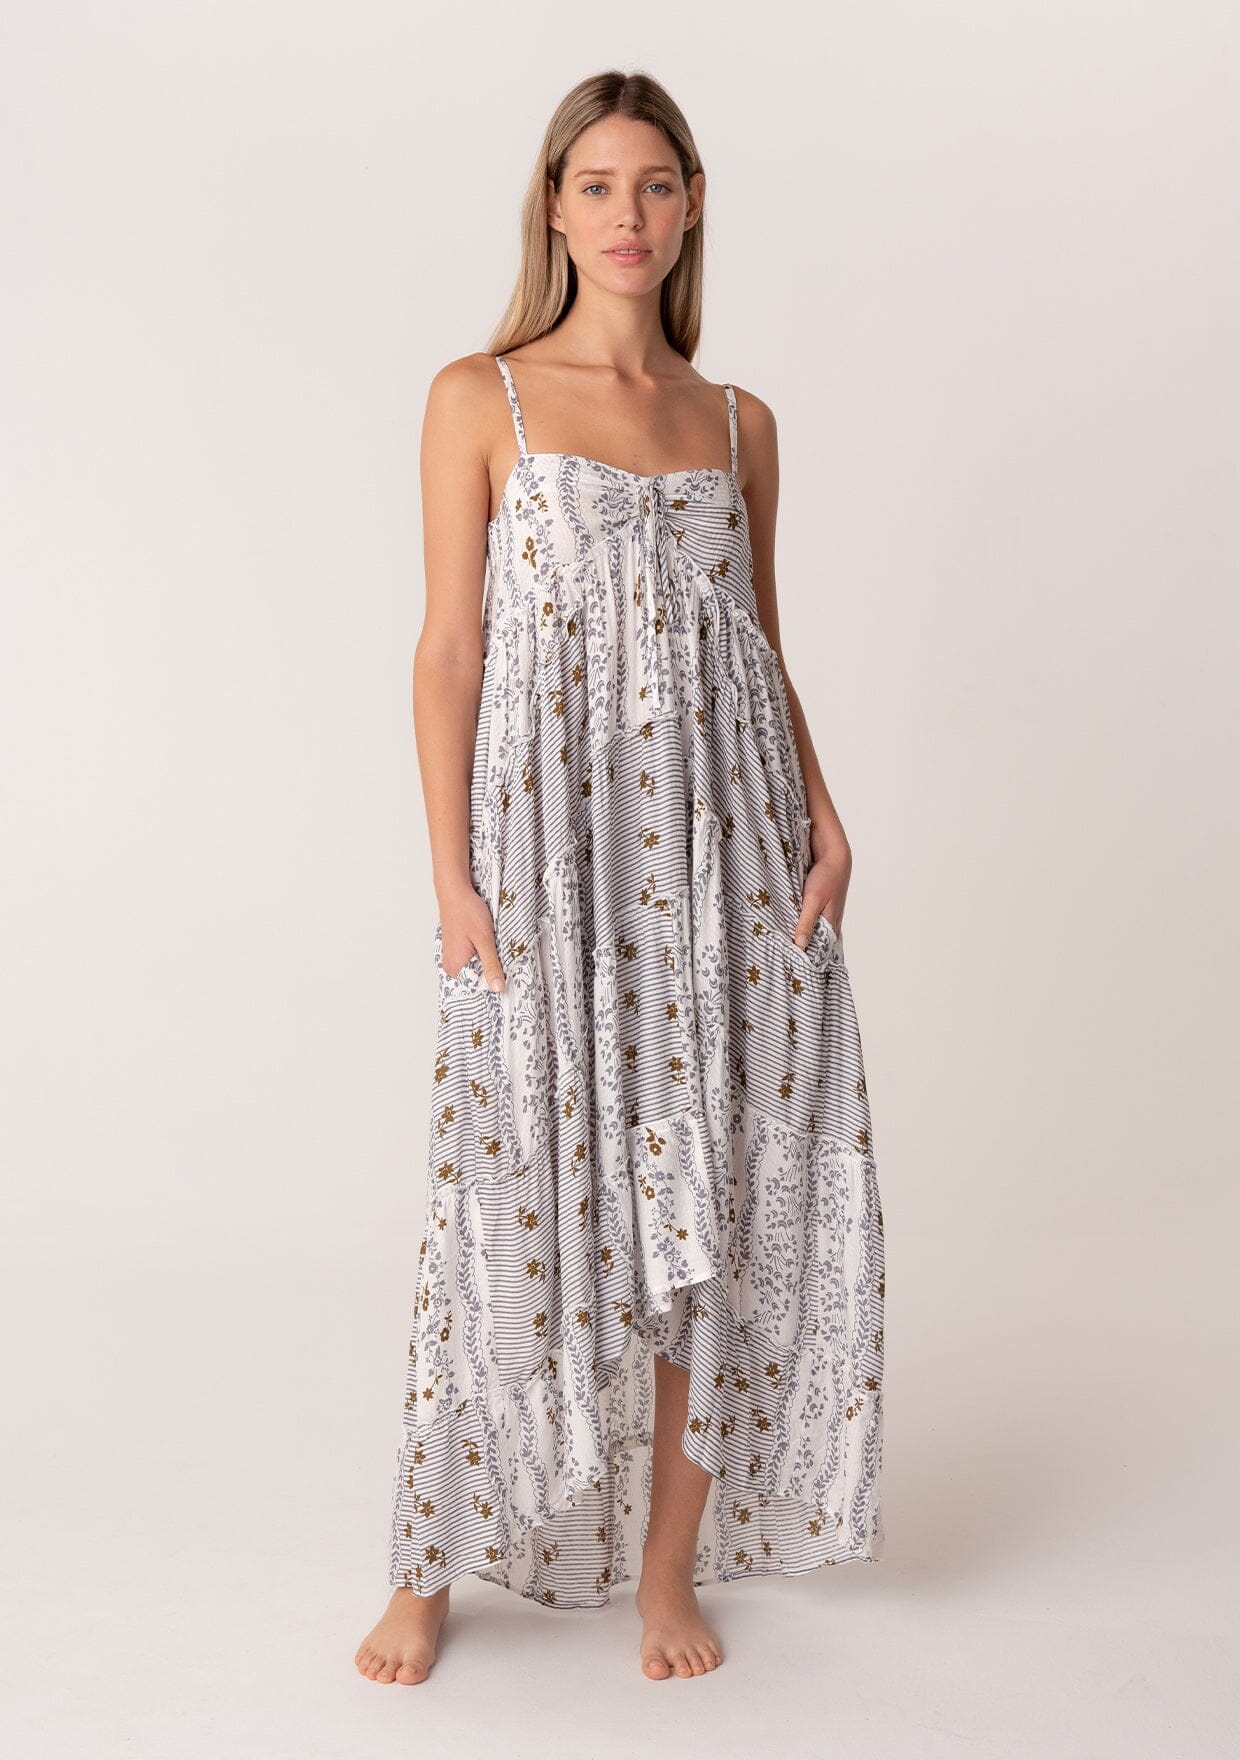 Lucky Brand White Sleeveless Floral Print Tie Front Maxi Dress M